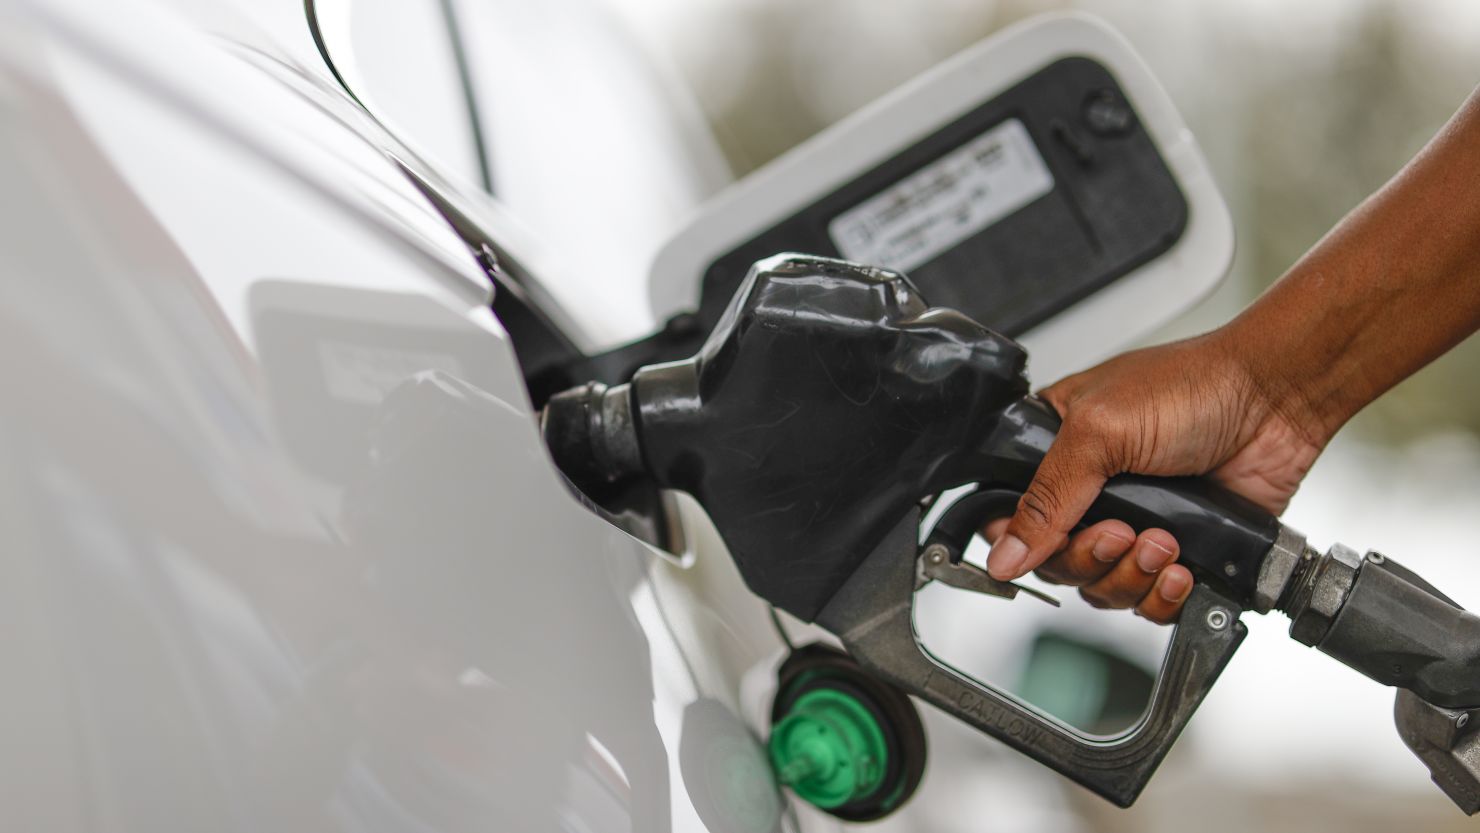 Rising gas prices were one of the biggest contributors to March's 3.5% annual rise in inflation.